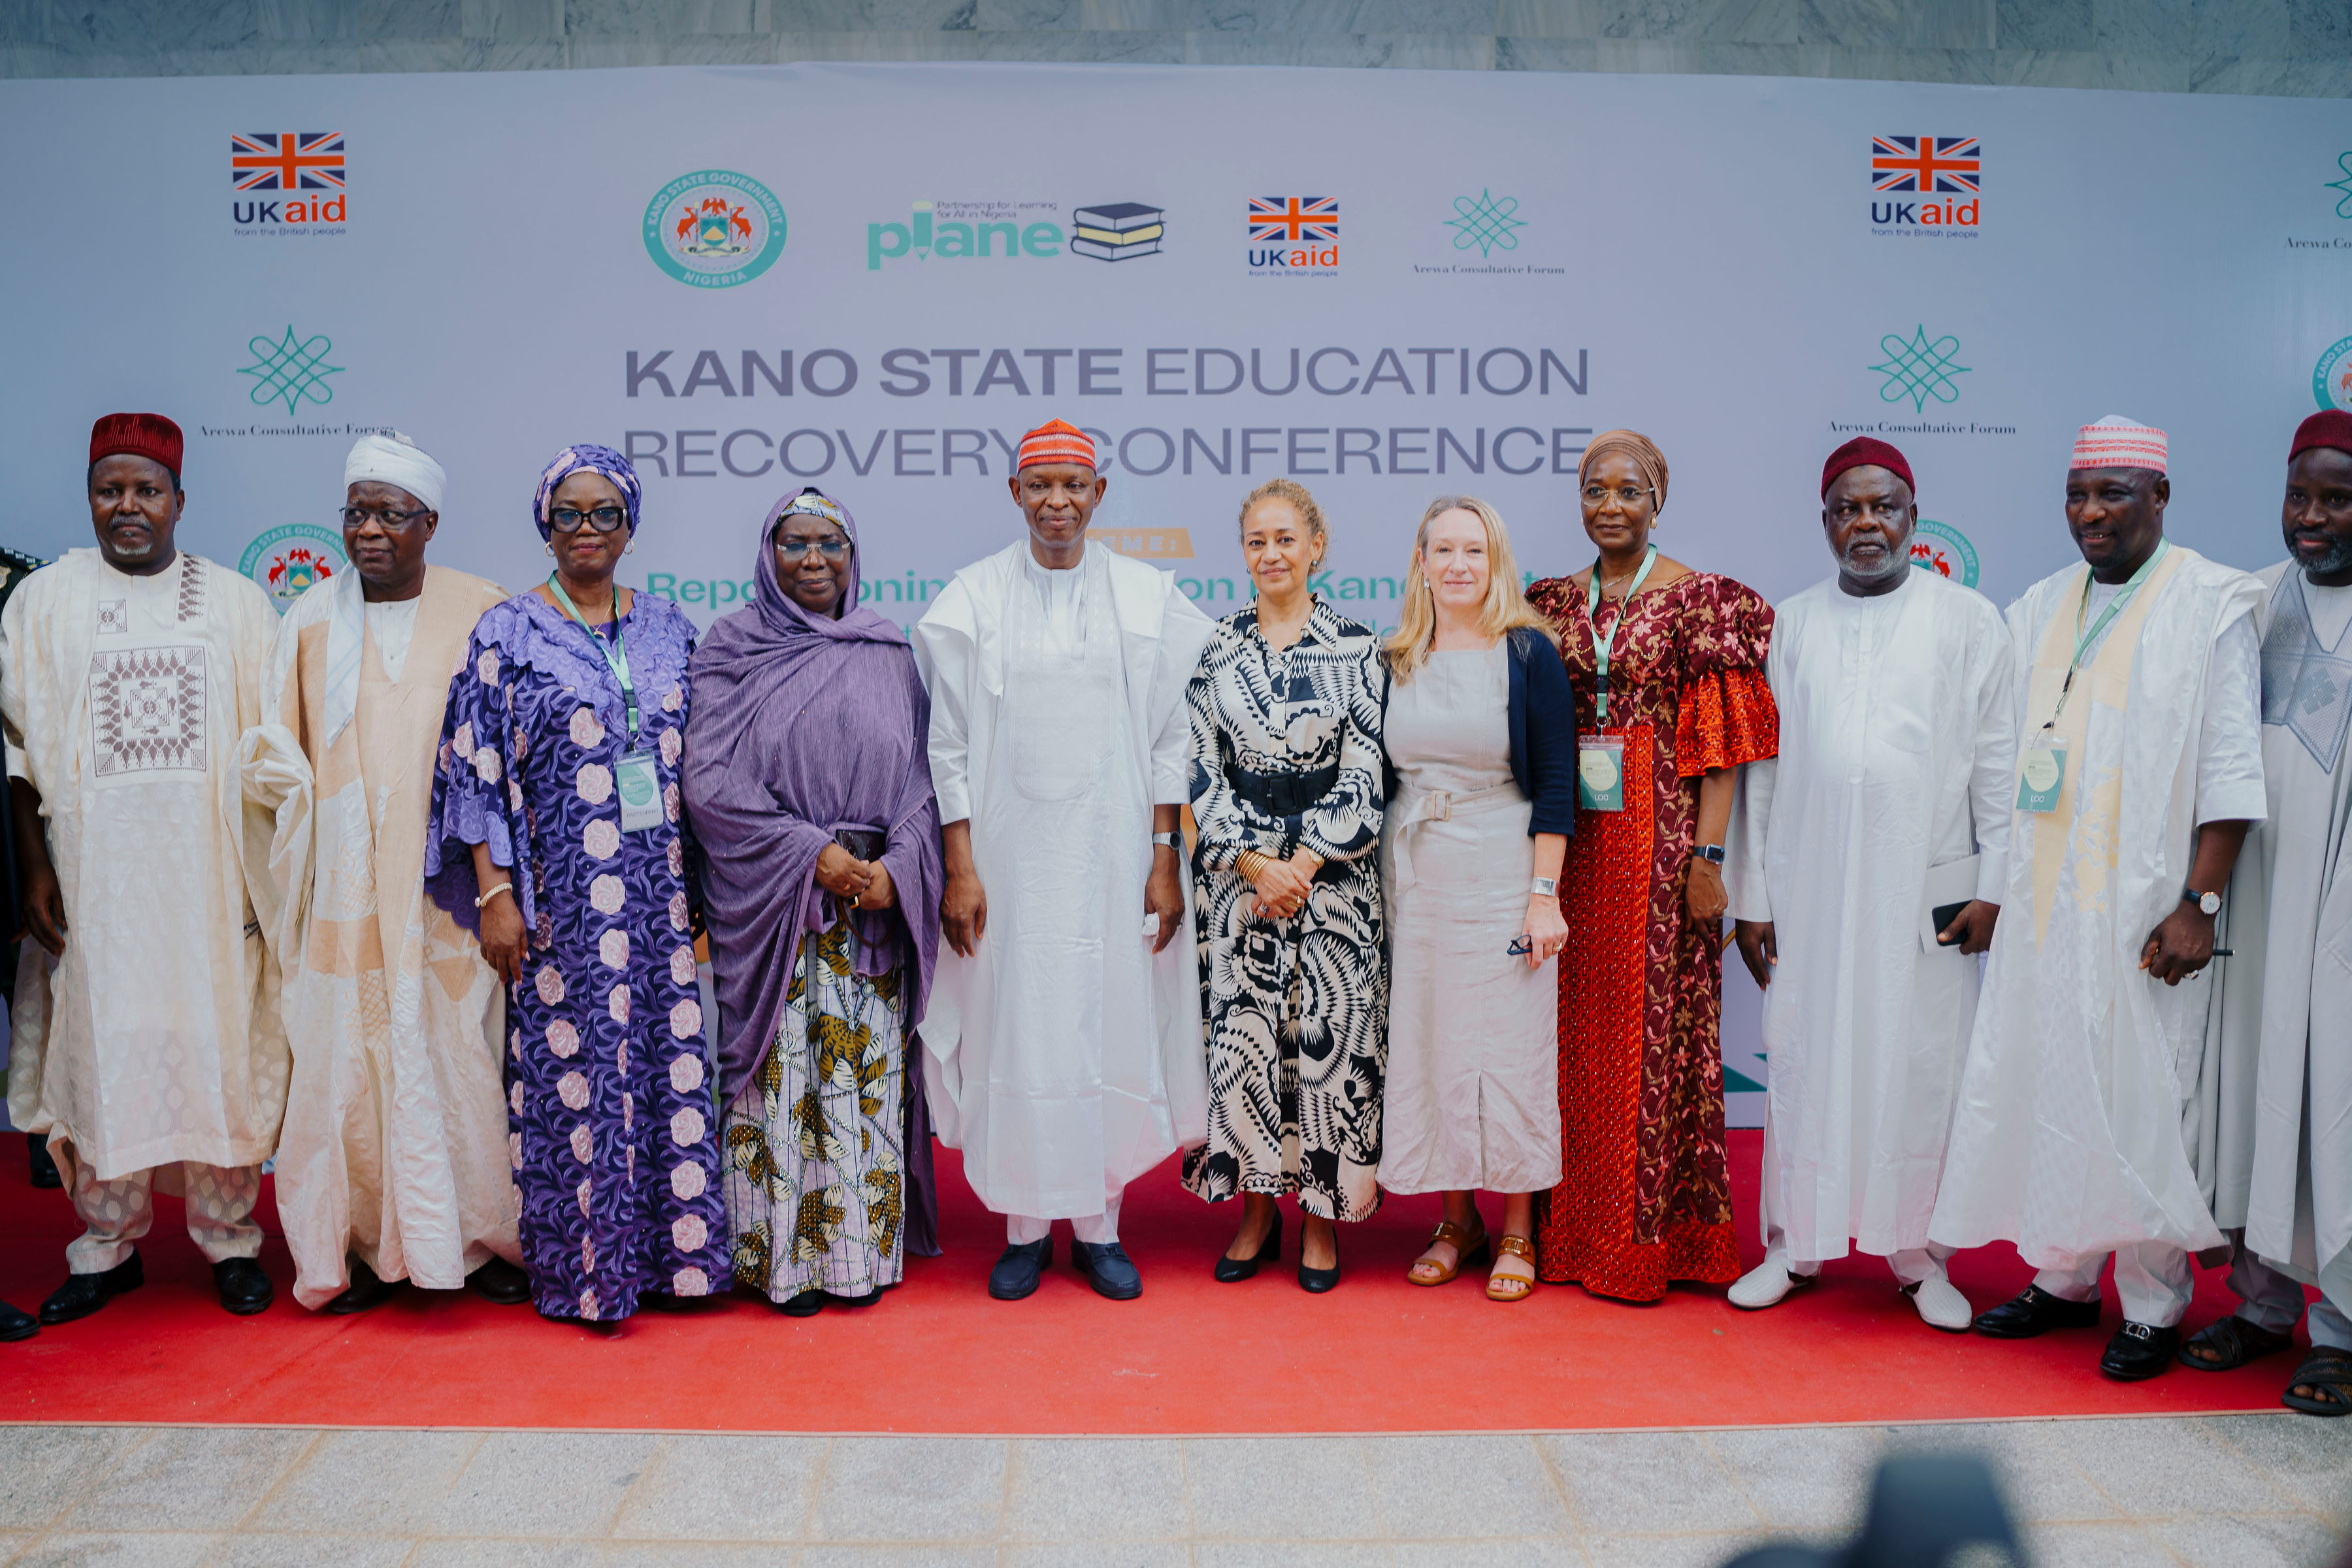 UK Reaffirms Commitment to Education at Kano Conference  